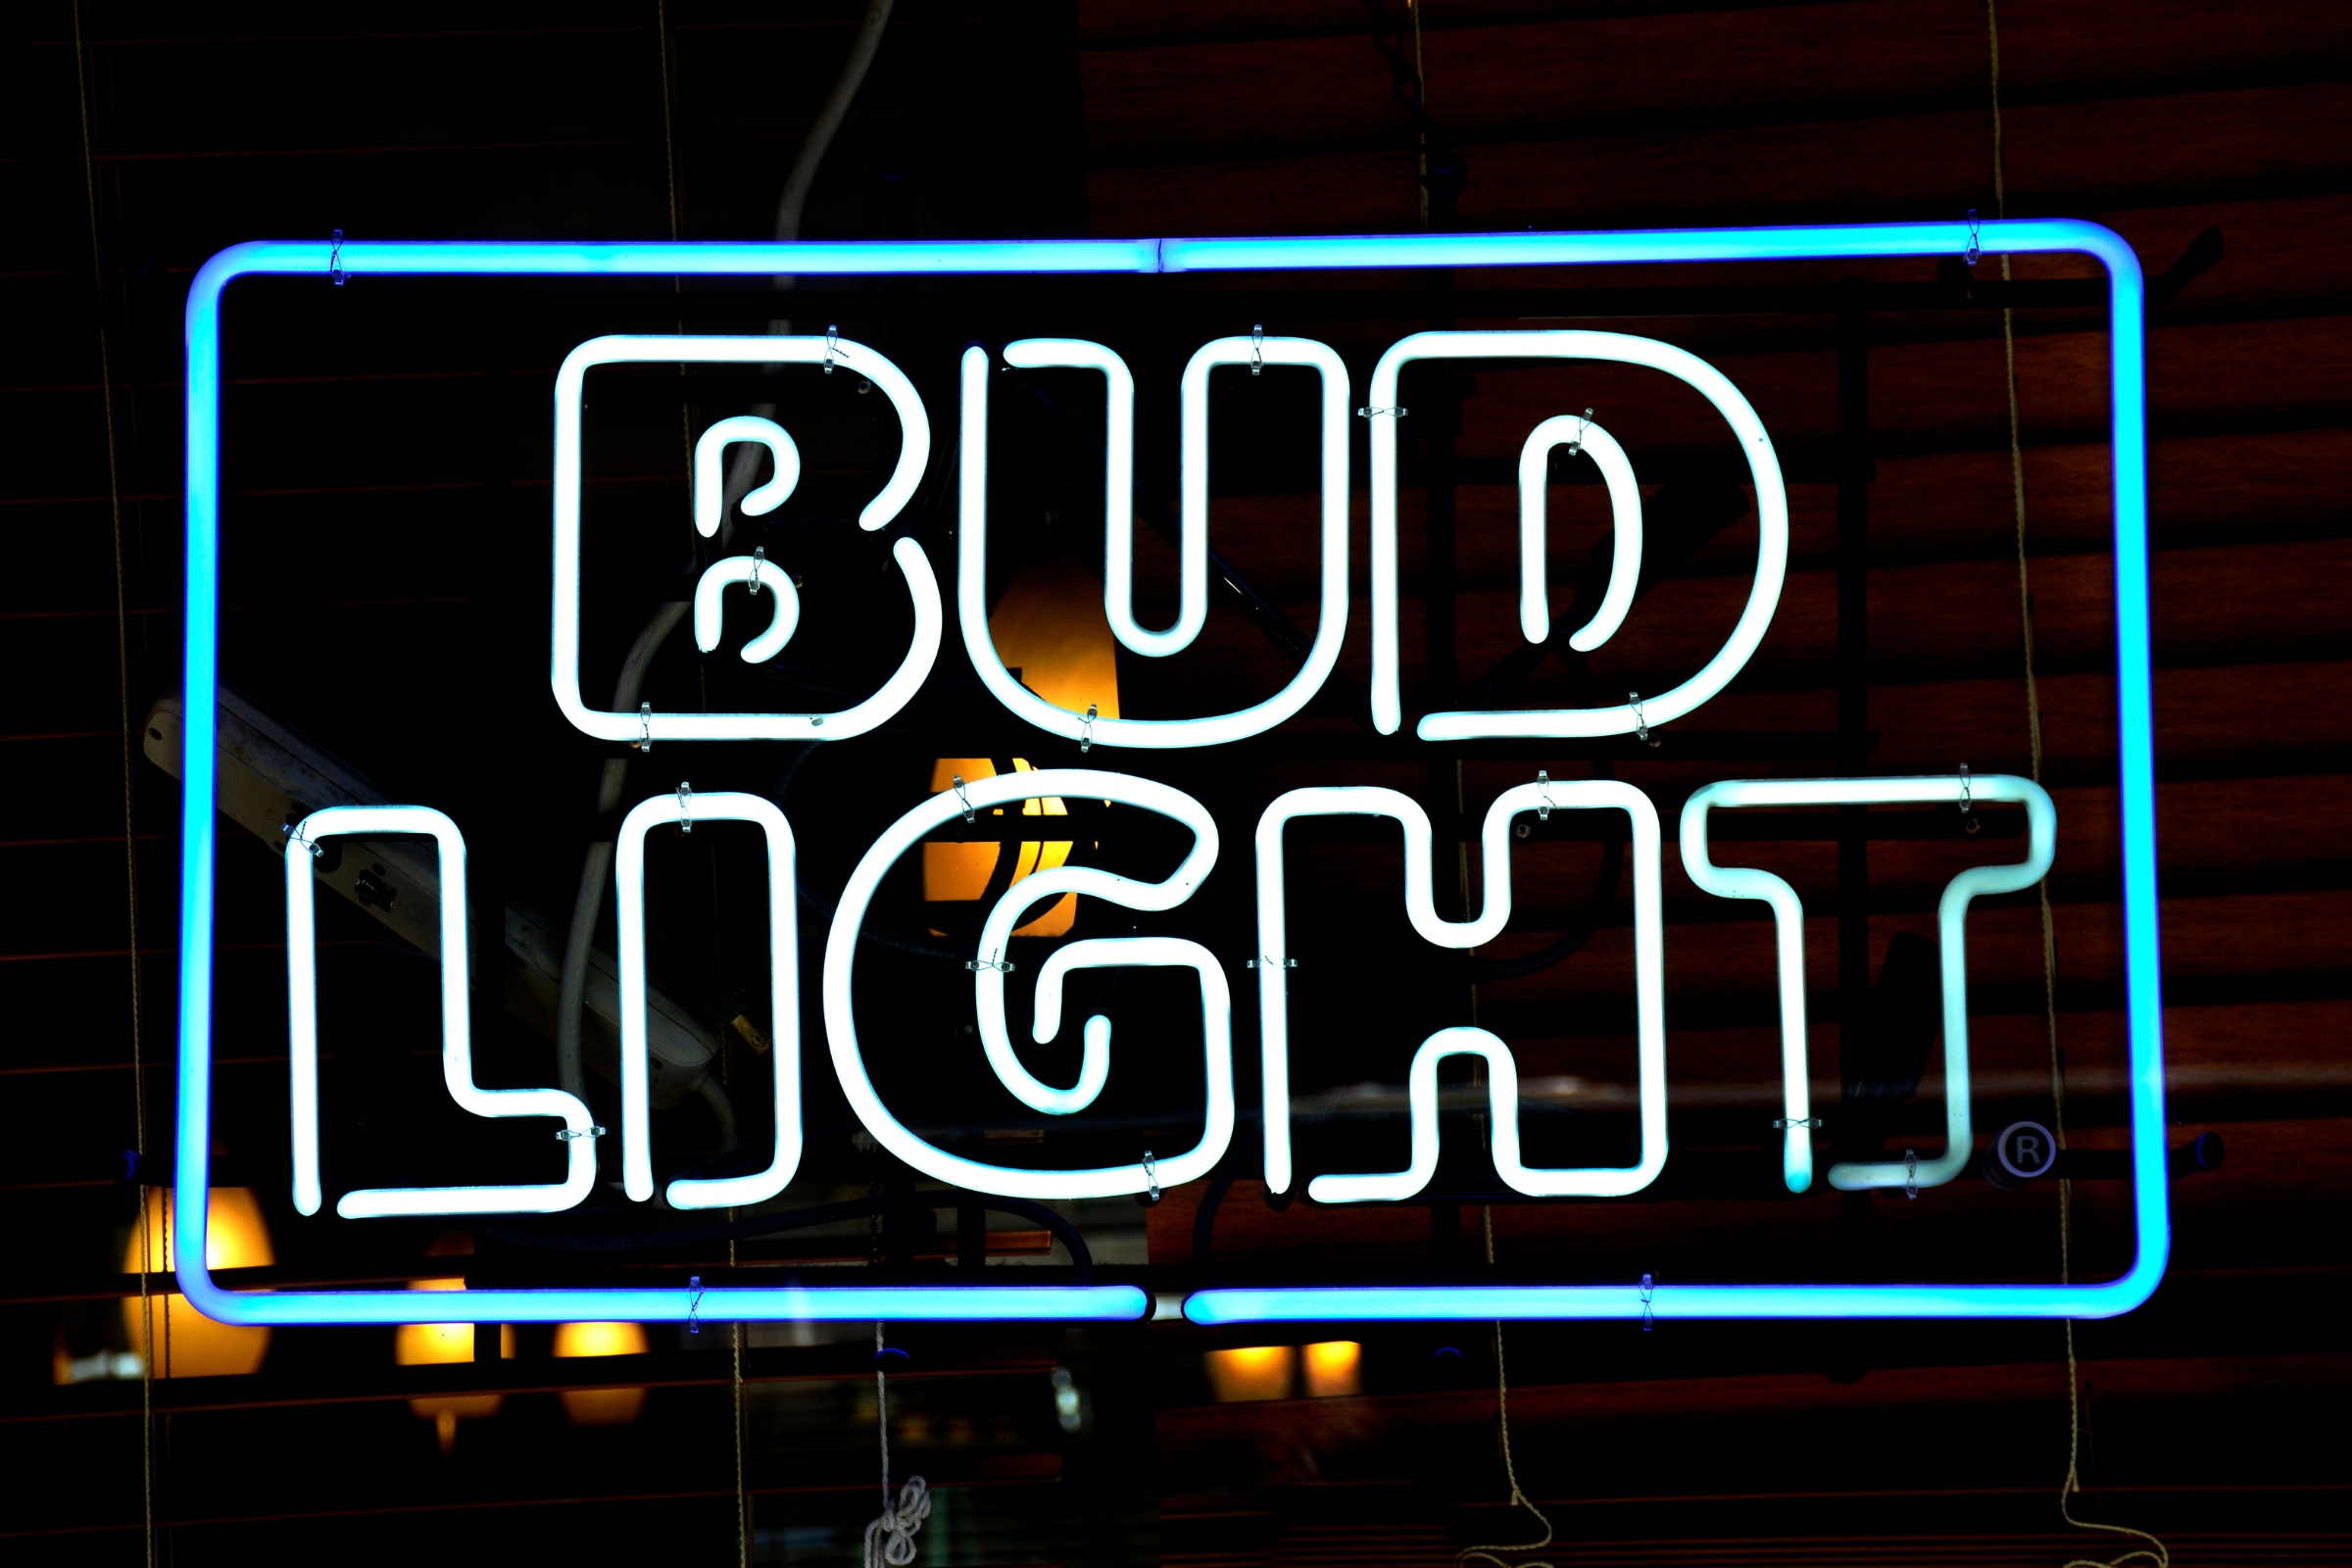 Bud Light ads are popping up in China after Dylan Mulvaney controversy